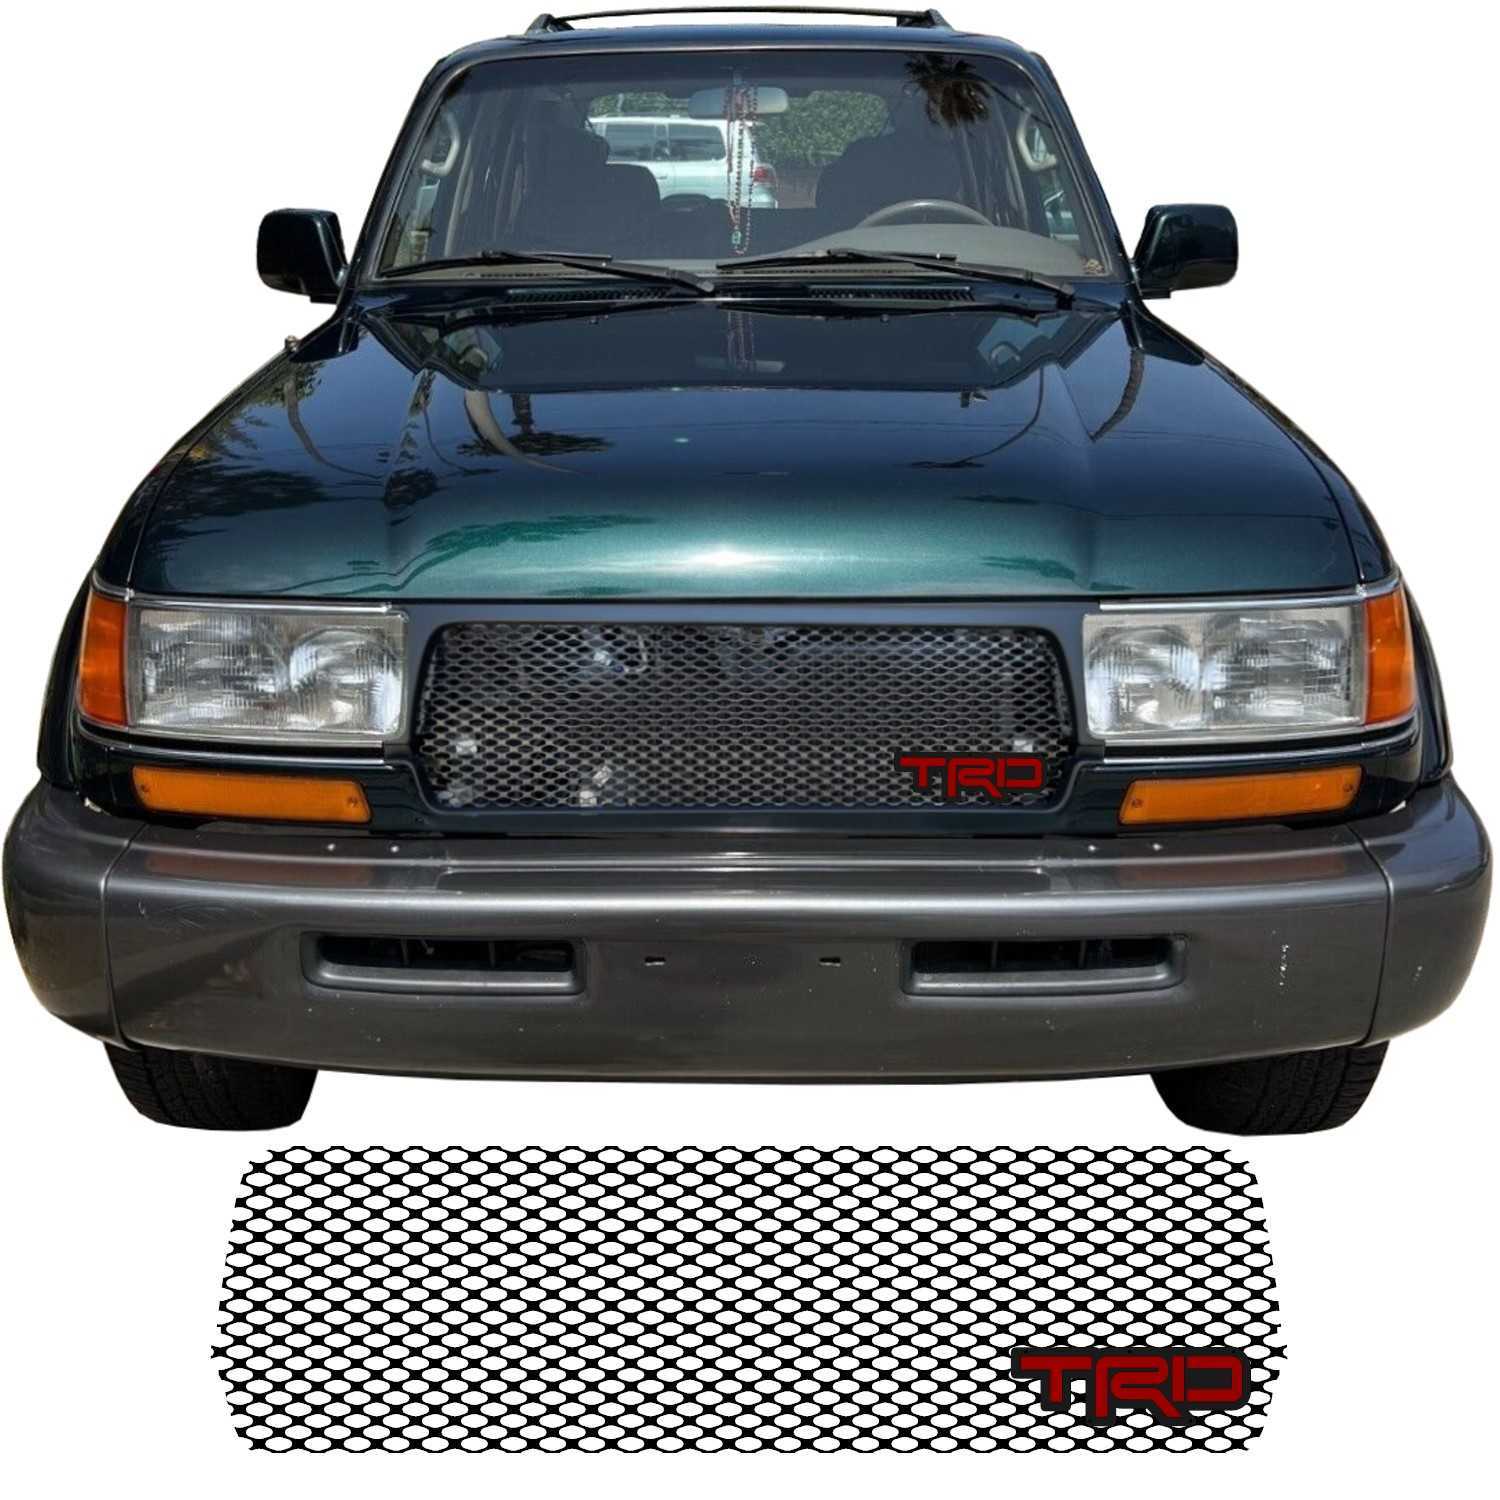 1991 - 1994 Toyota Land Cruiser Series 80 Grill Mesh and TRD Emblem